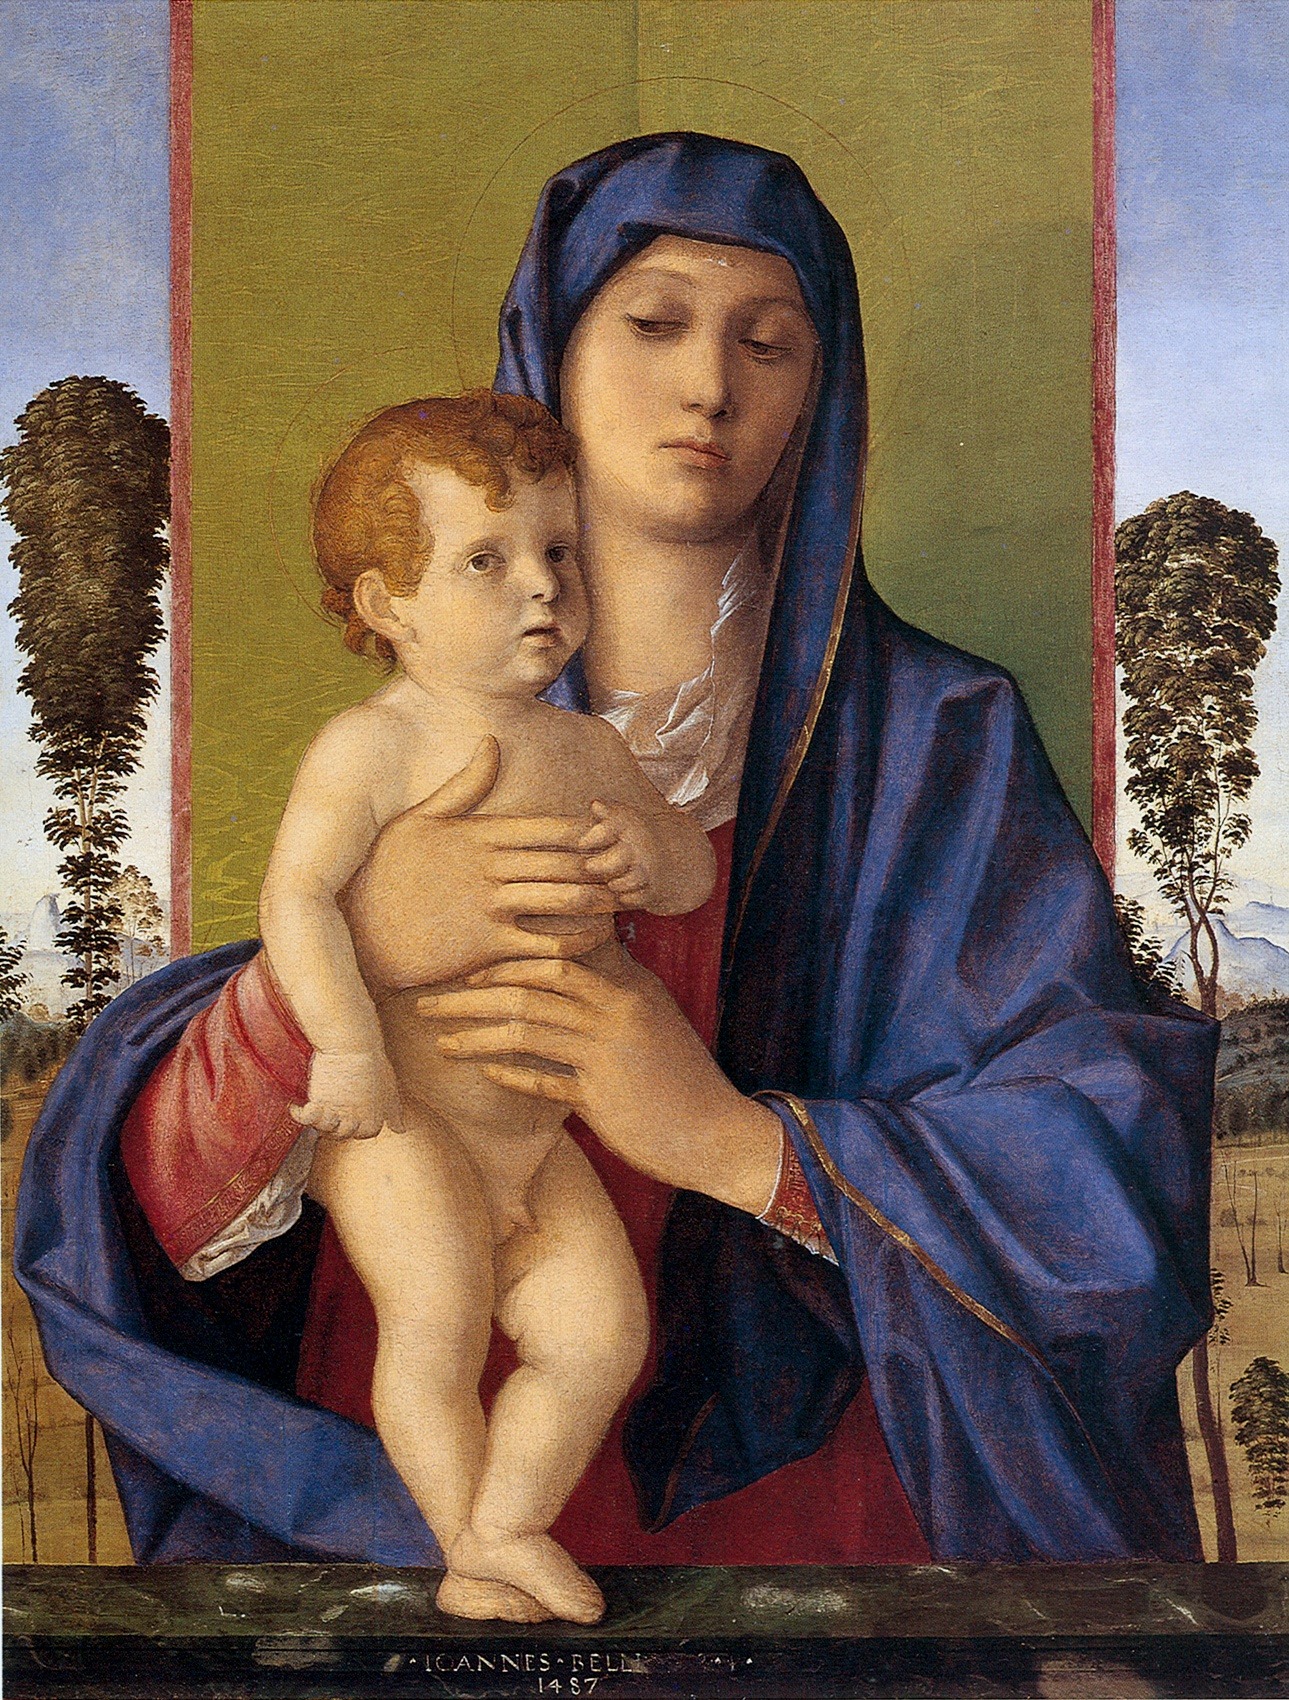 A painting of Madonna holding a baby.